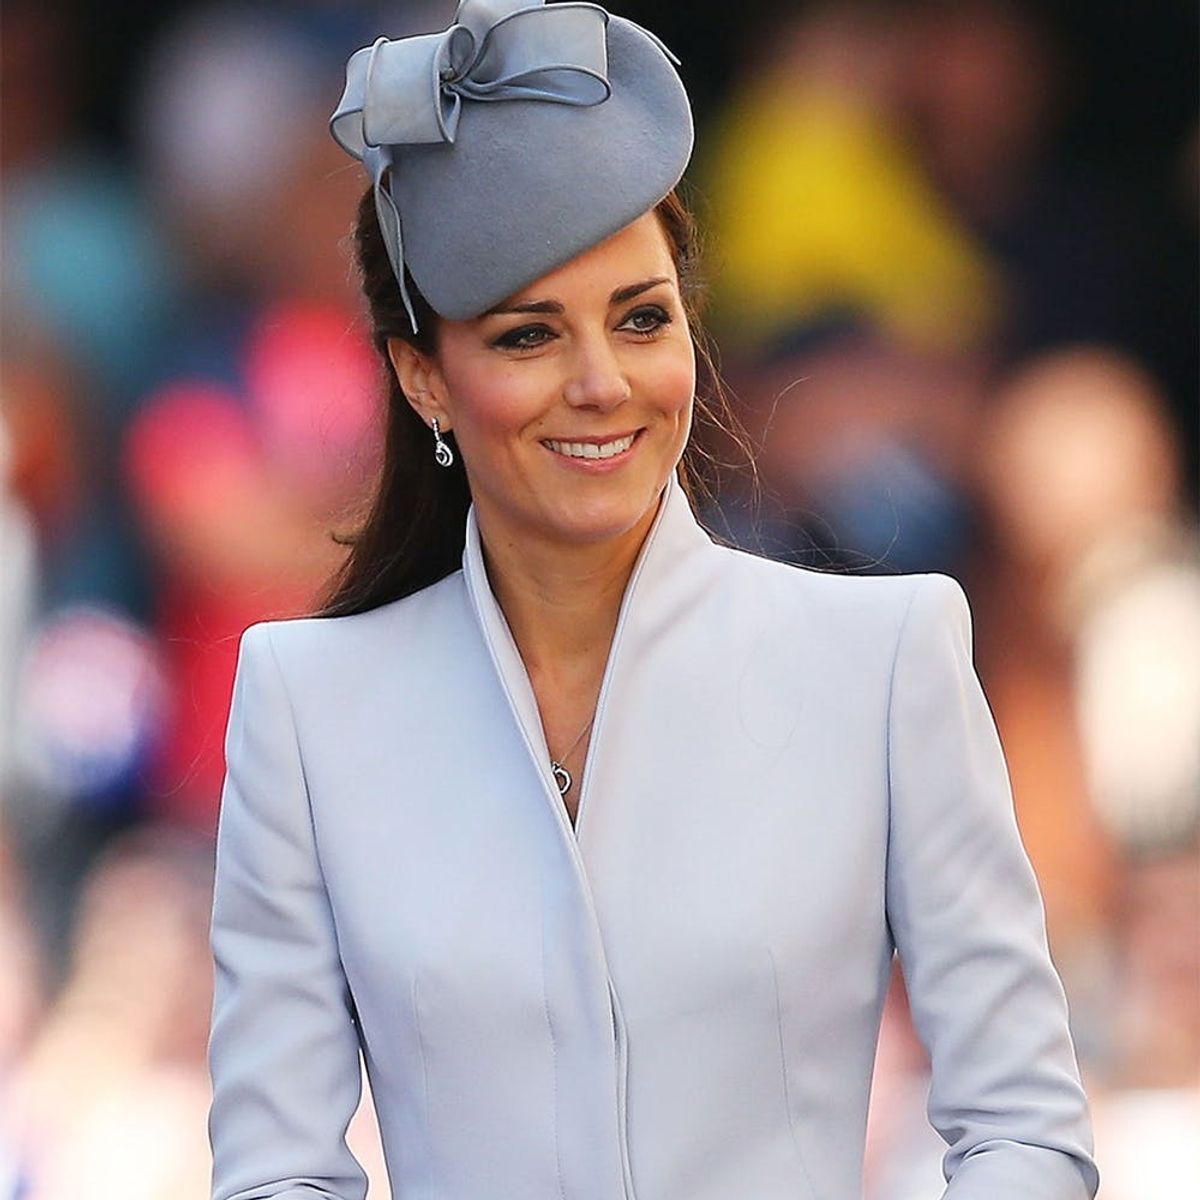 Kate Middleton’s New Favorite Workout Is Not What You’d Expect